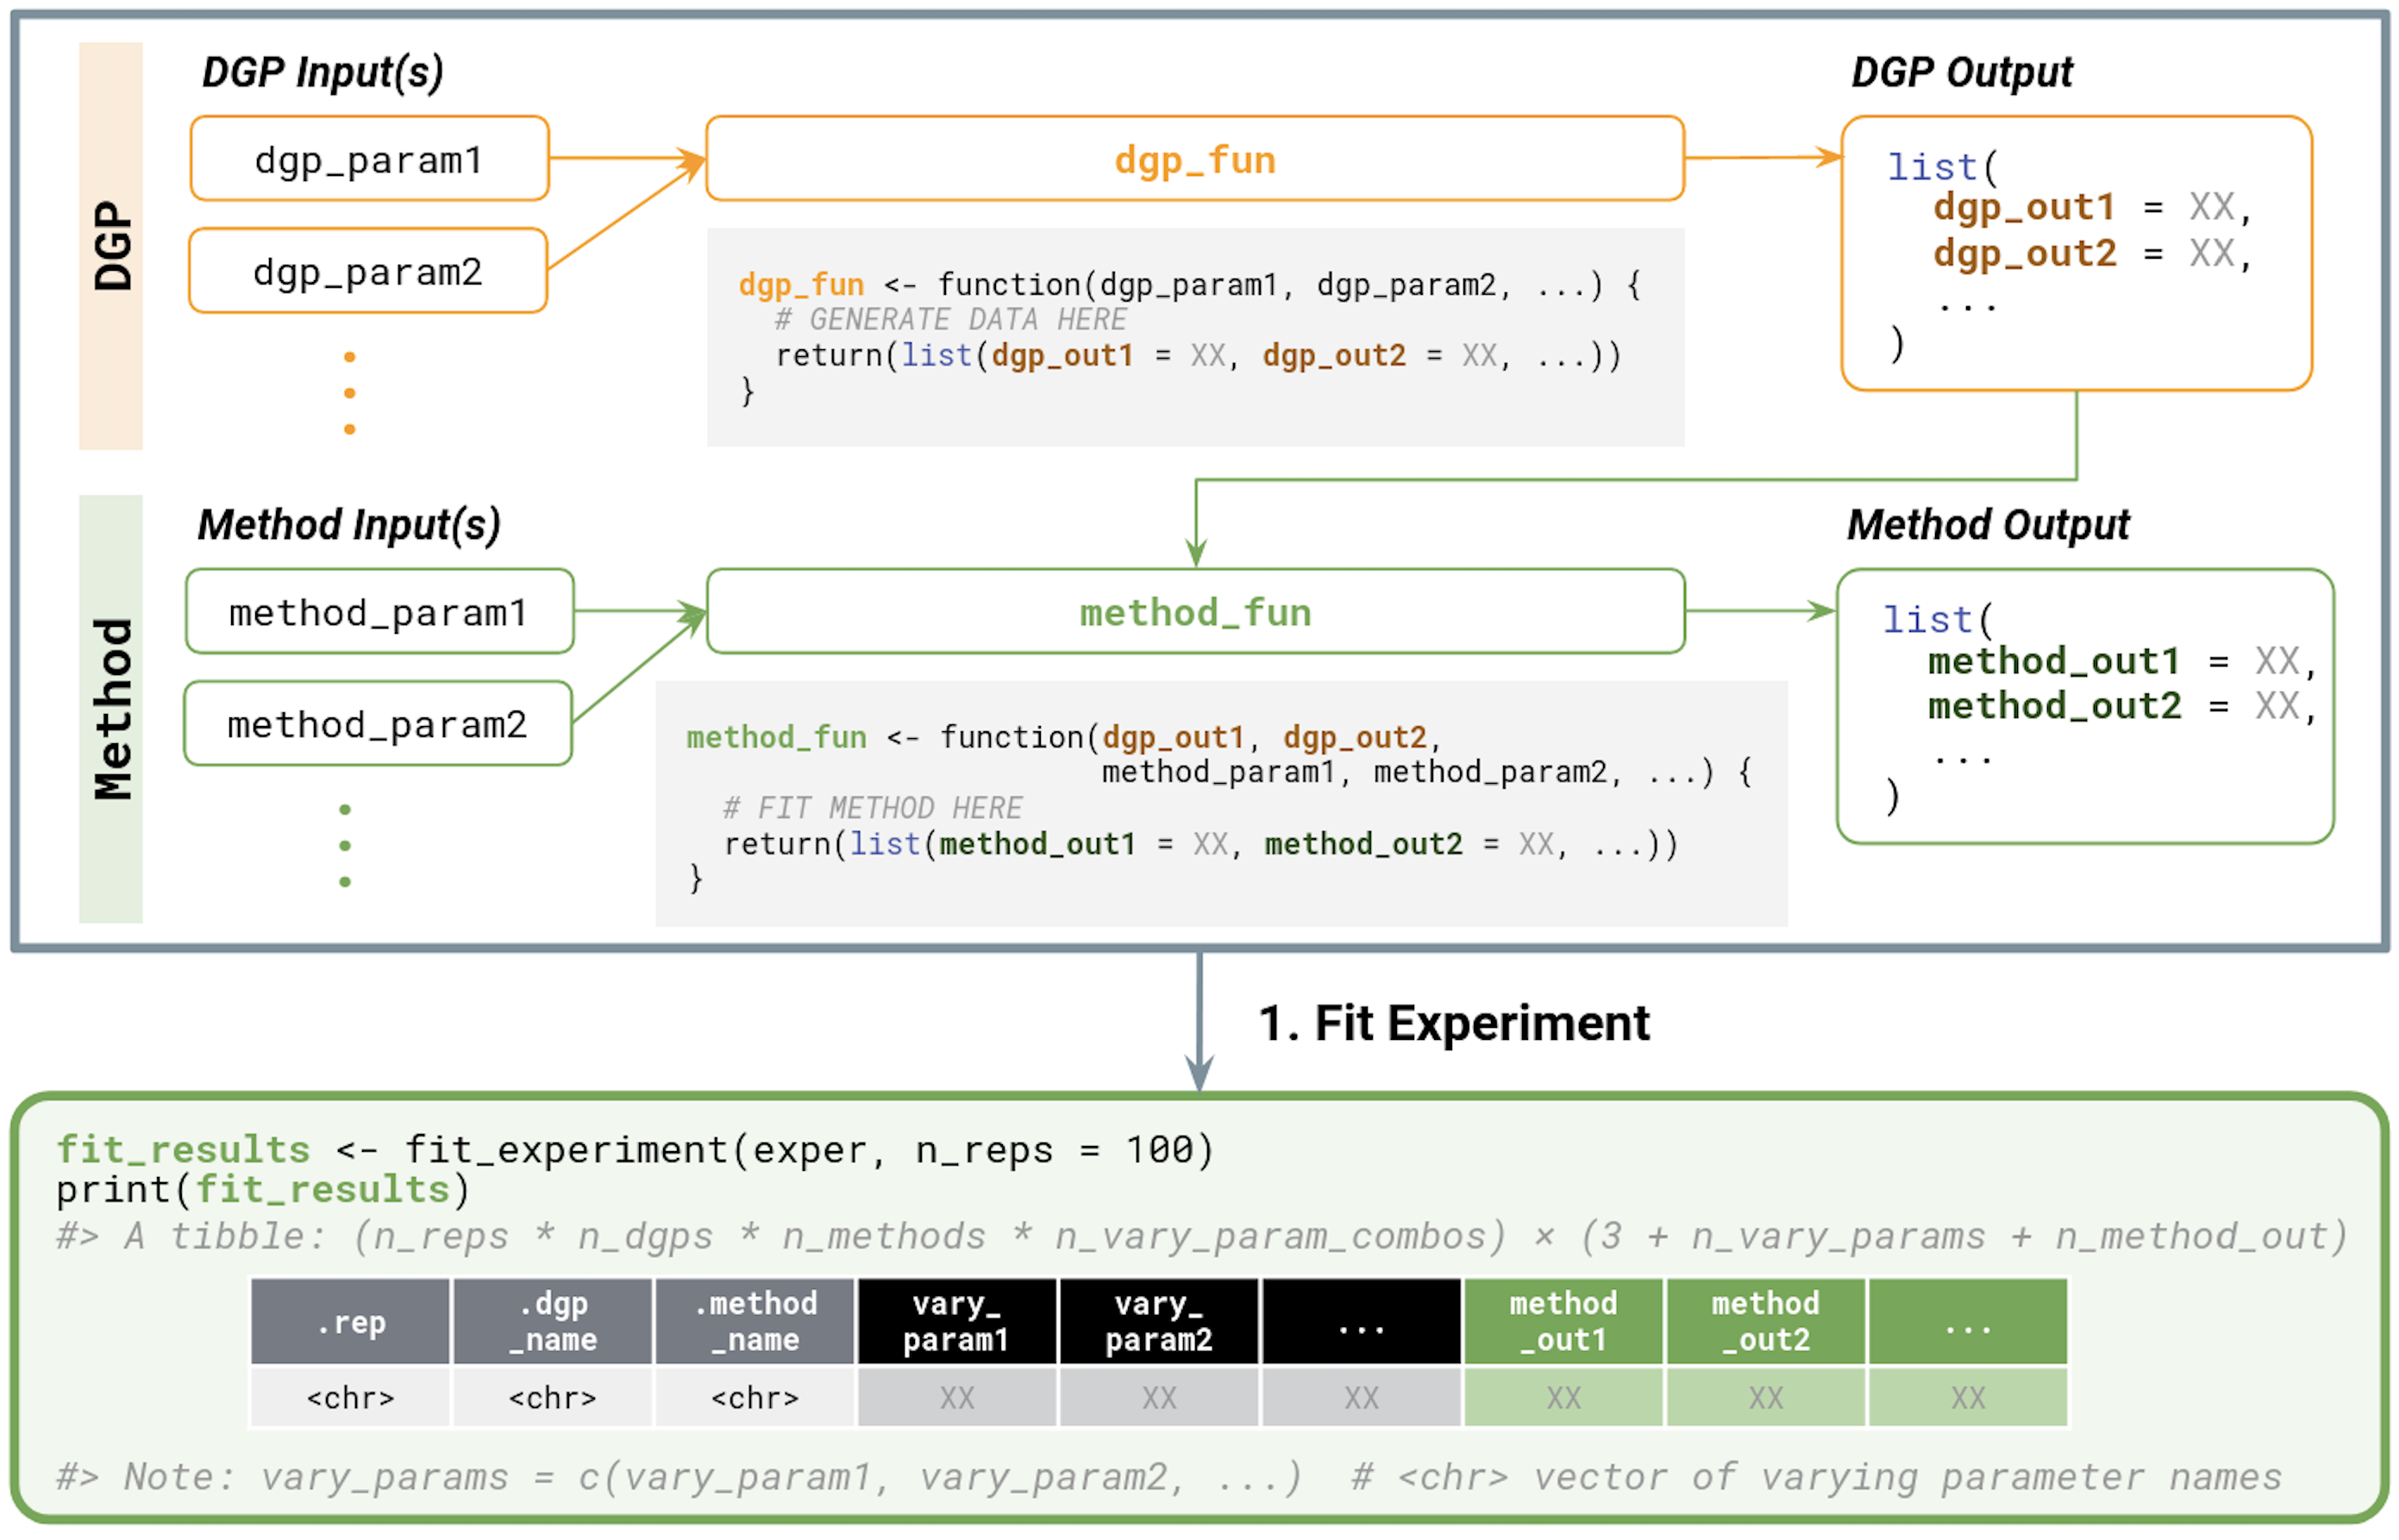  Overview of fitting a simChef Experiment. Inputs and outputs for user-defined functions are also provided.